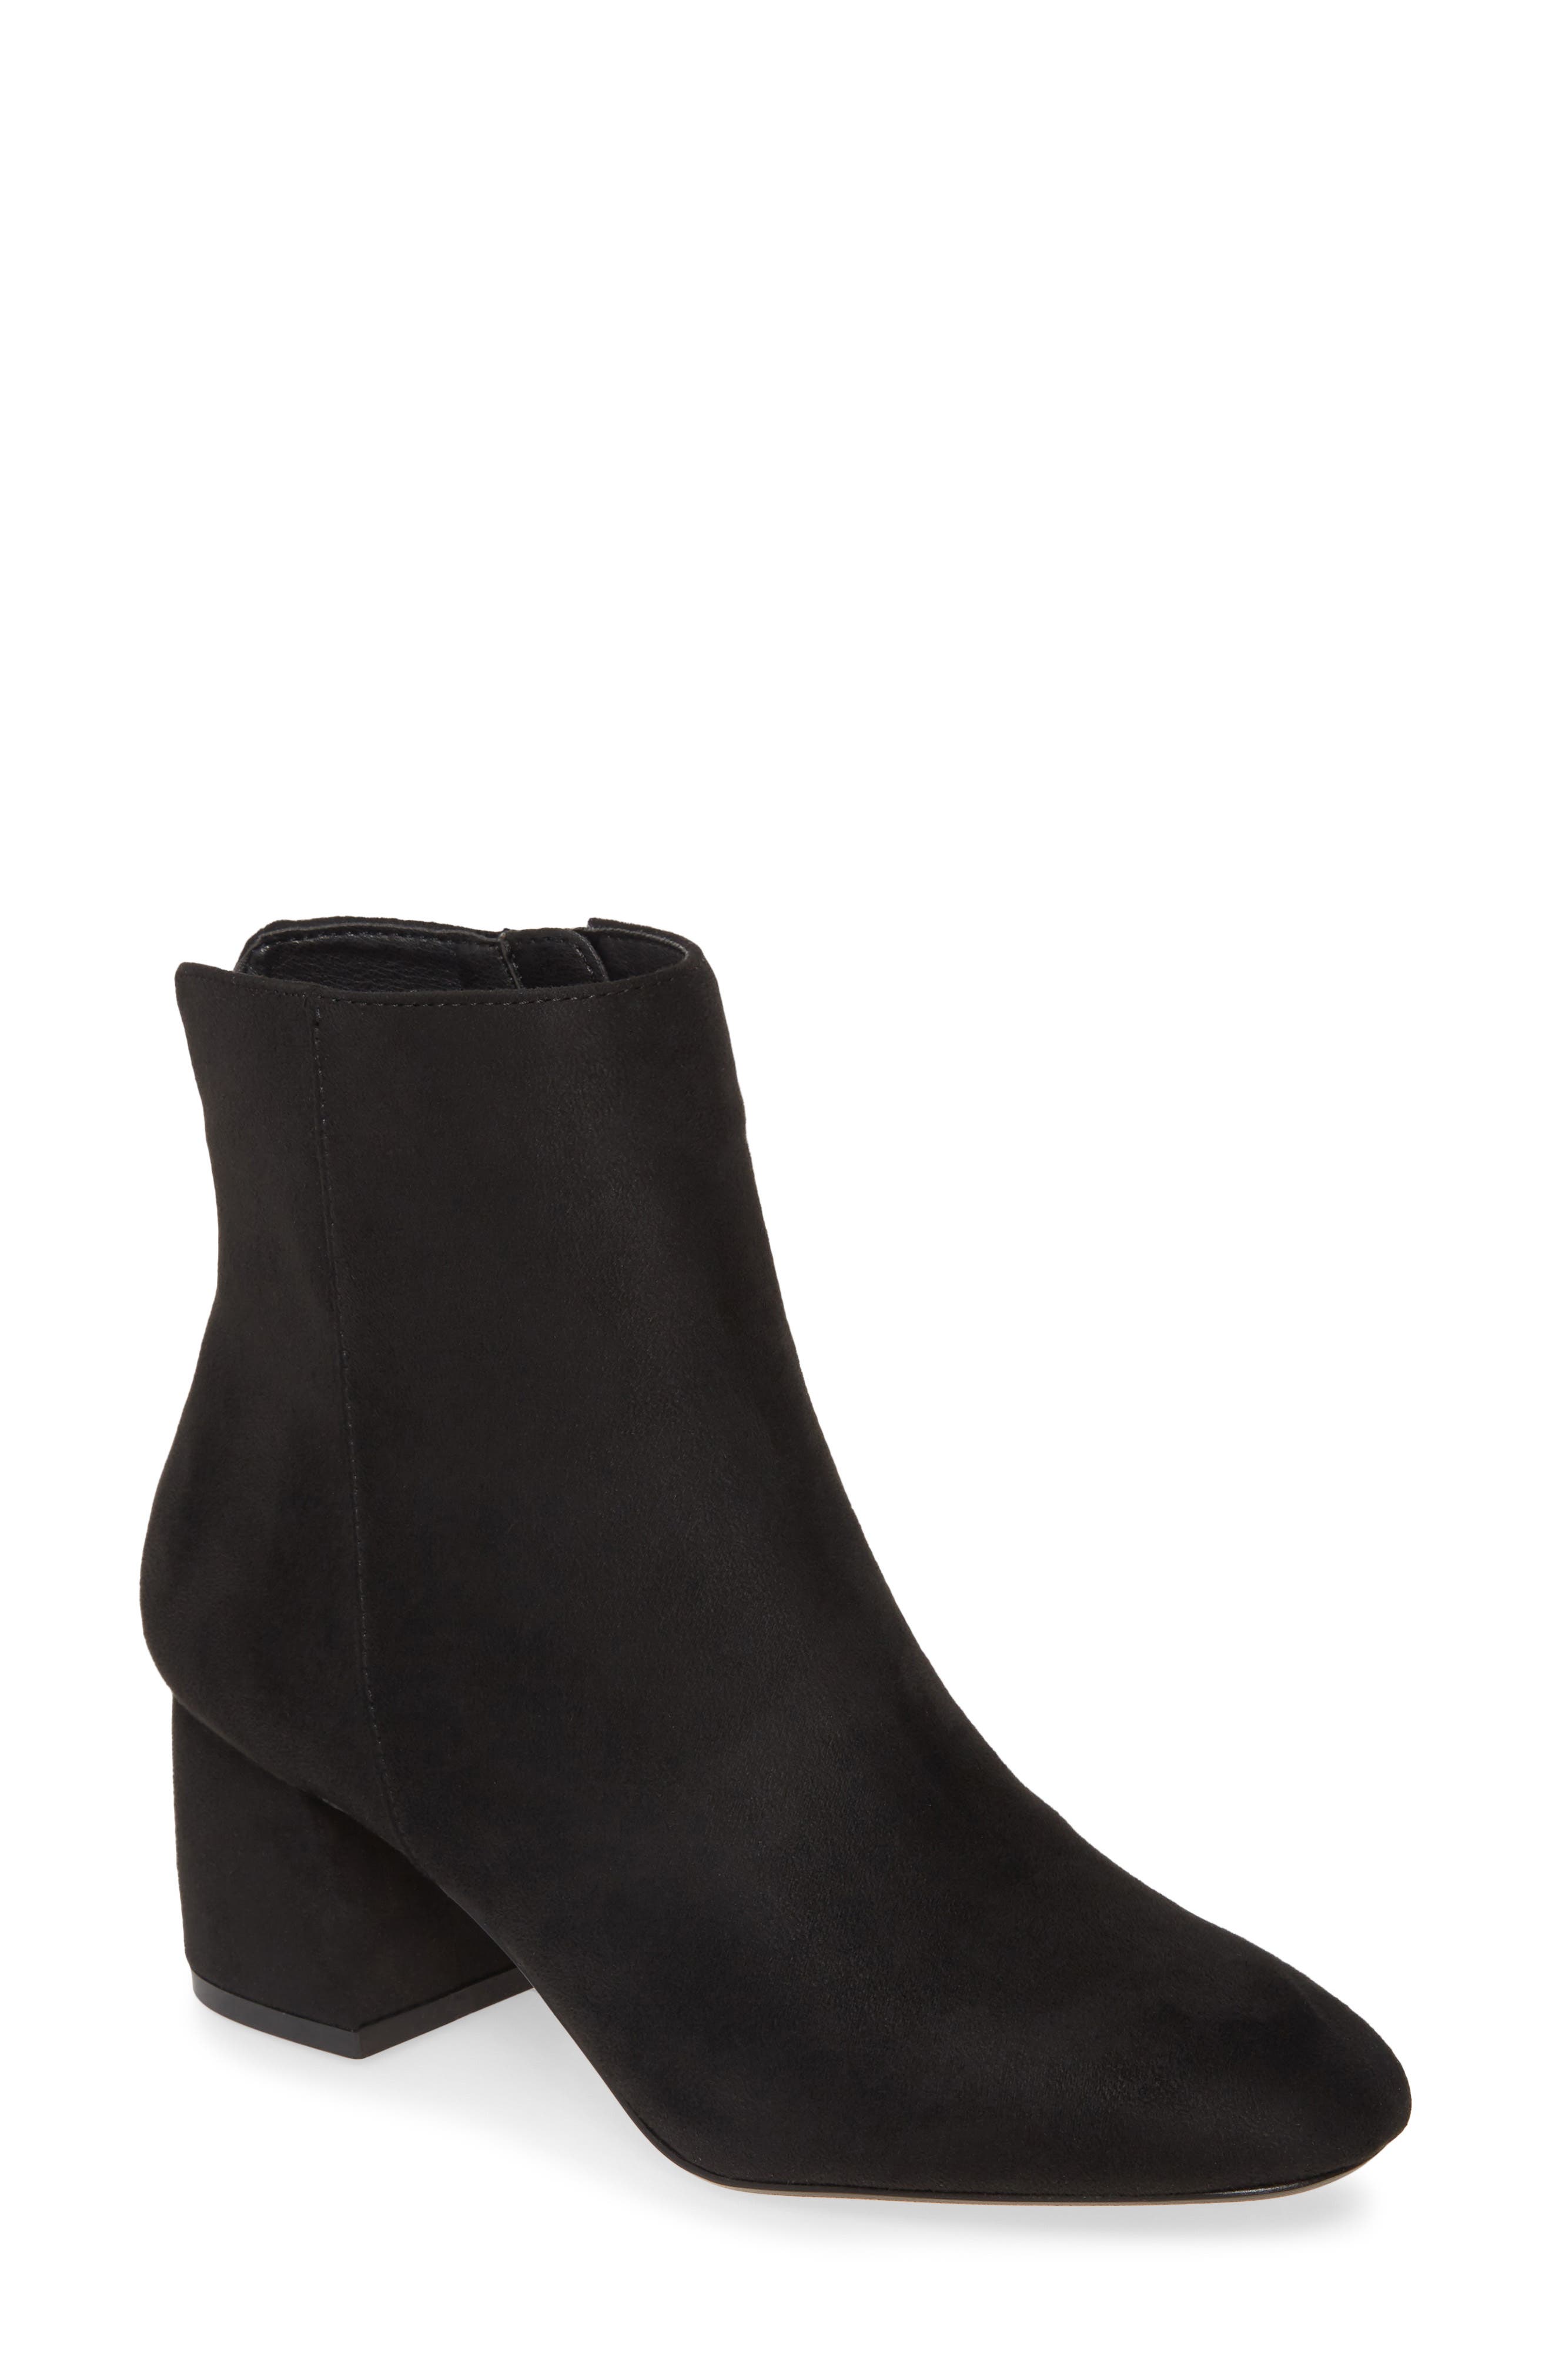 white ankle boots nordstrom